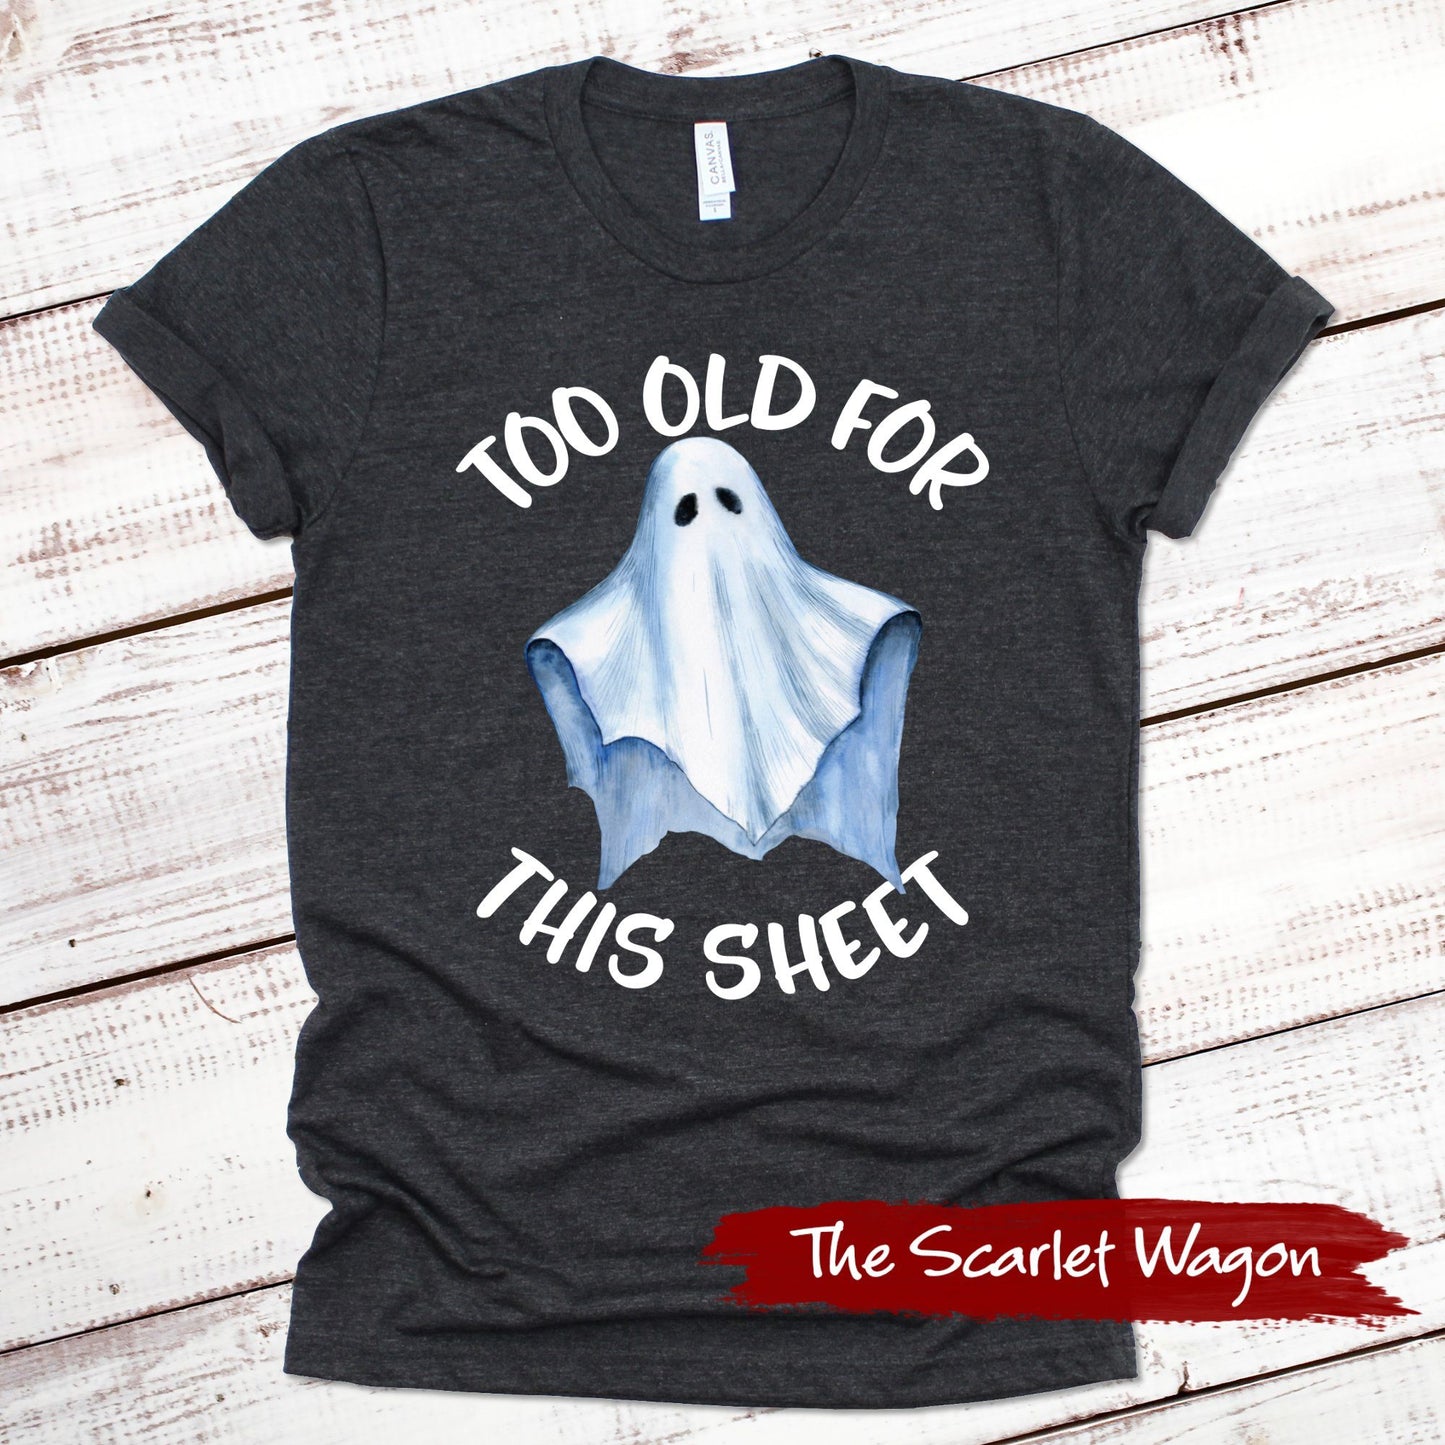 Too Old for This Sheet Halloween Shirt Scarlet Wagon Dark Gray Heather XS 